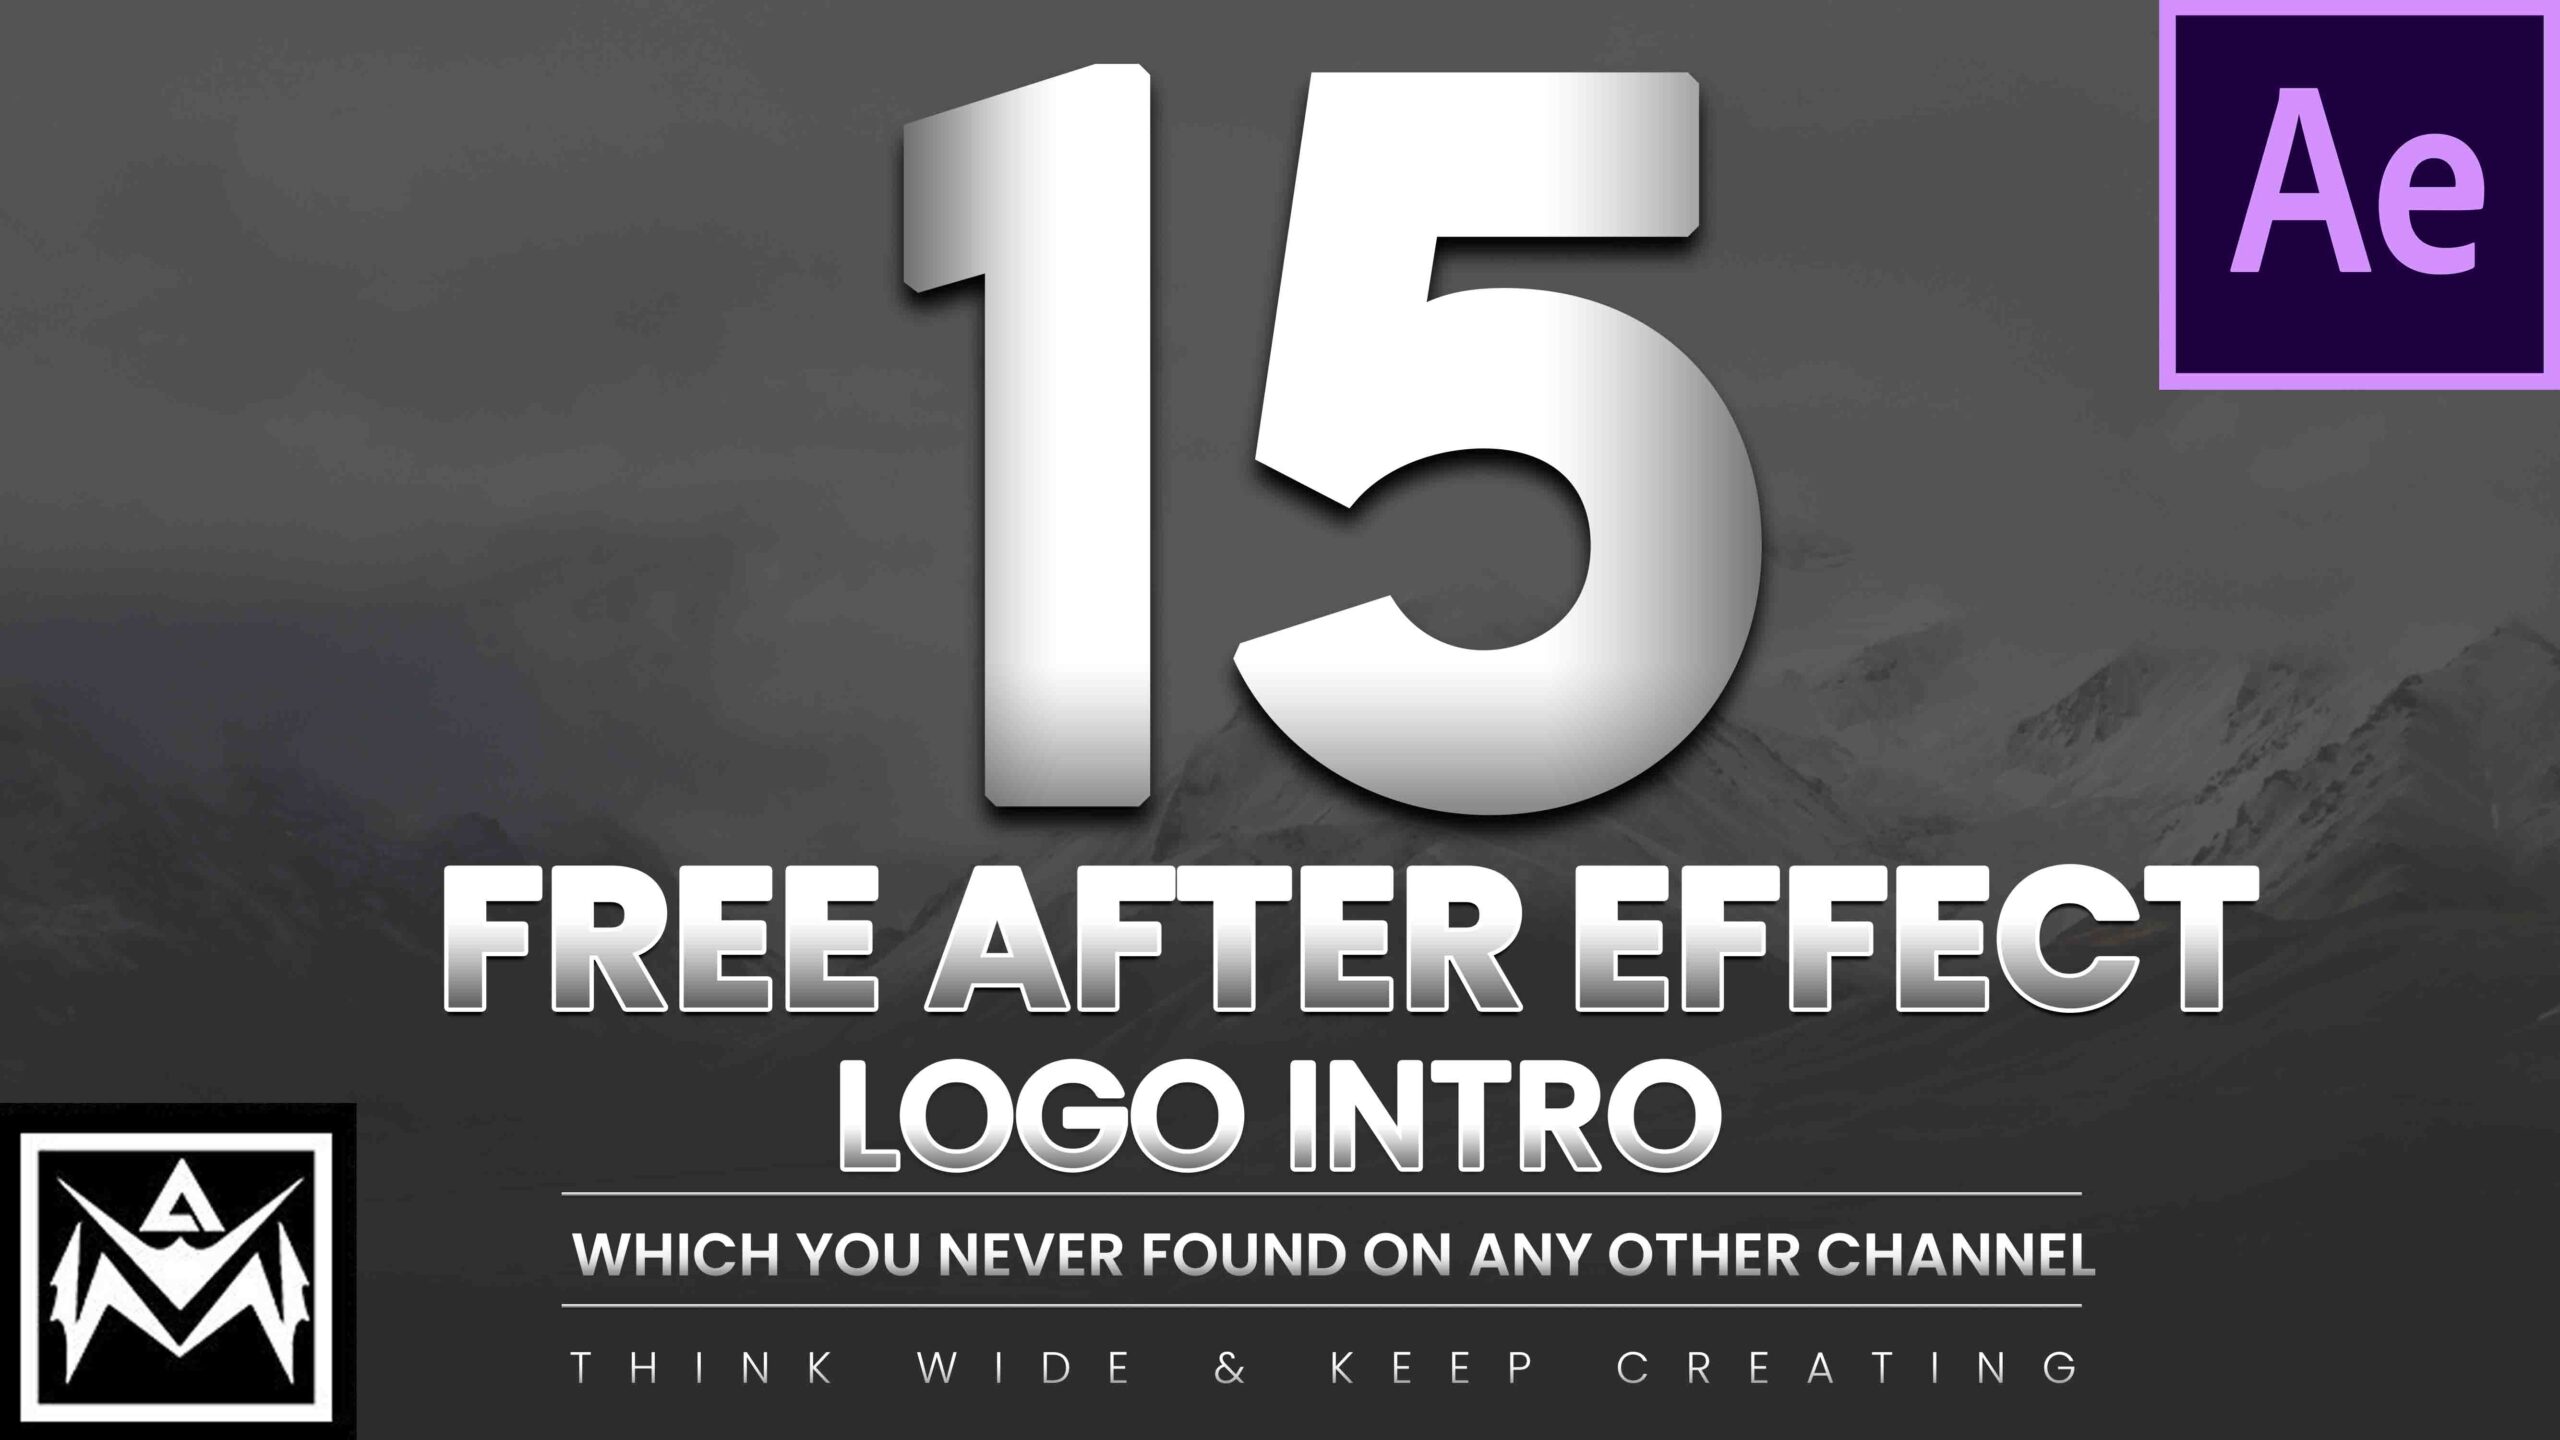 After effect logo intro template